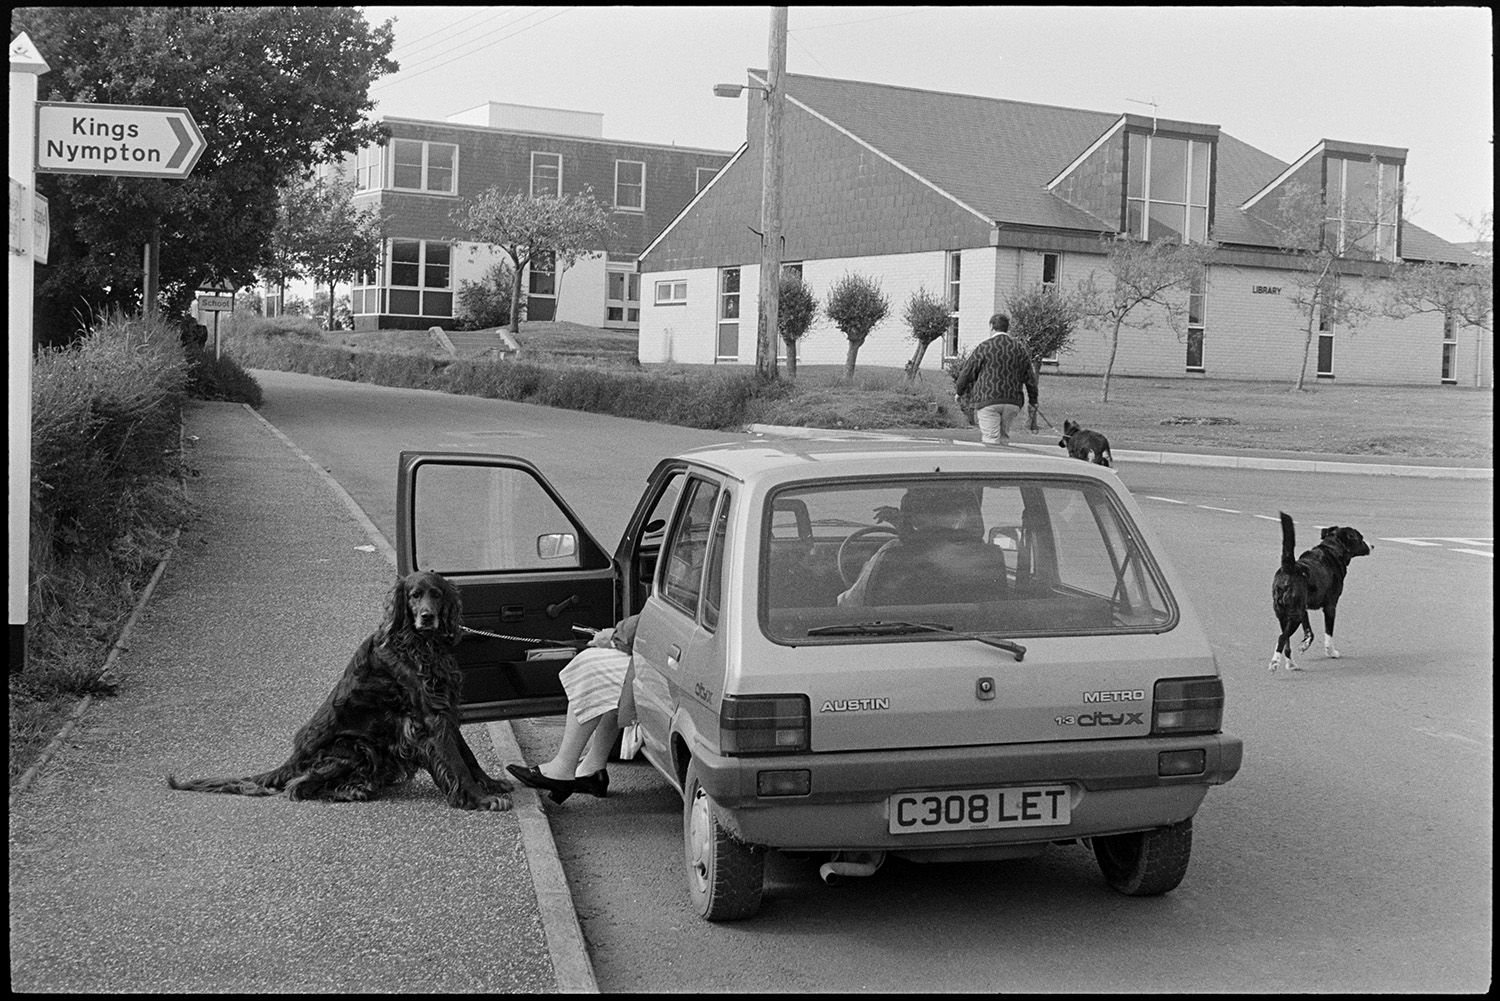 Street scenes with cars.
[A street scene showing South Molton Street, Chulmleigh. There is a Austin Metro car parked on the road with a woman passenger holding a red setter dog on a lead. A man is walking up the road with a dog on a lead, and another dog is crossing the road. A road sign pointing to Kings Nympton, and school buildings are visible in the background.]